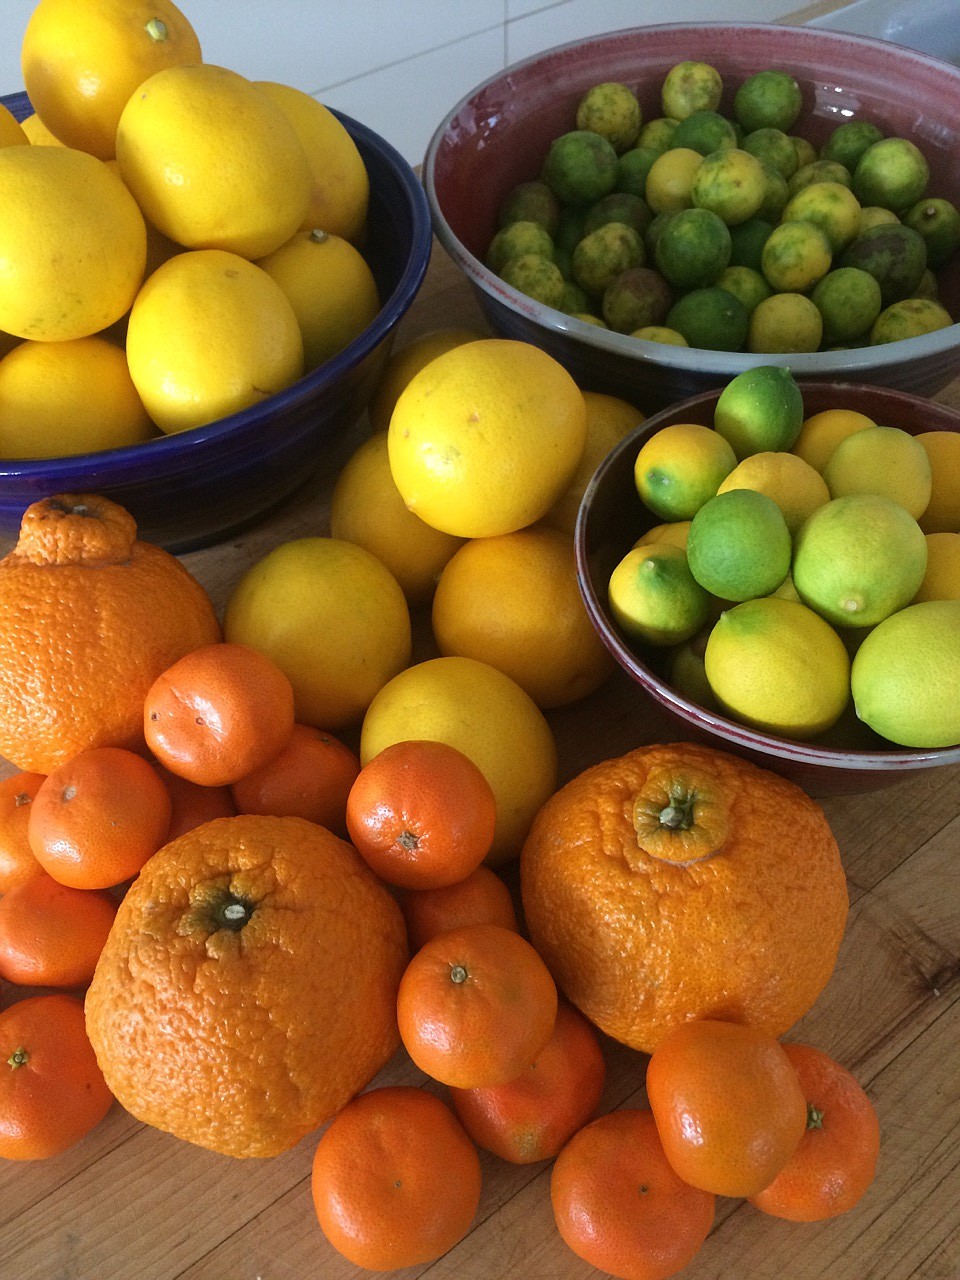 Beautiful citrus fruits are abundant during Northwest winters, bringing a little sunshine to the home cook.